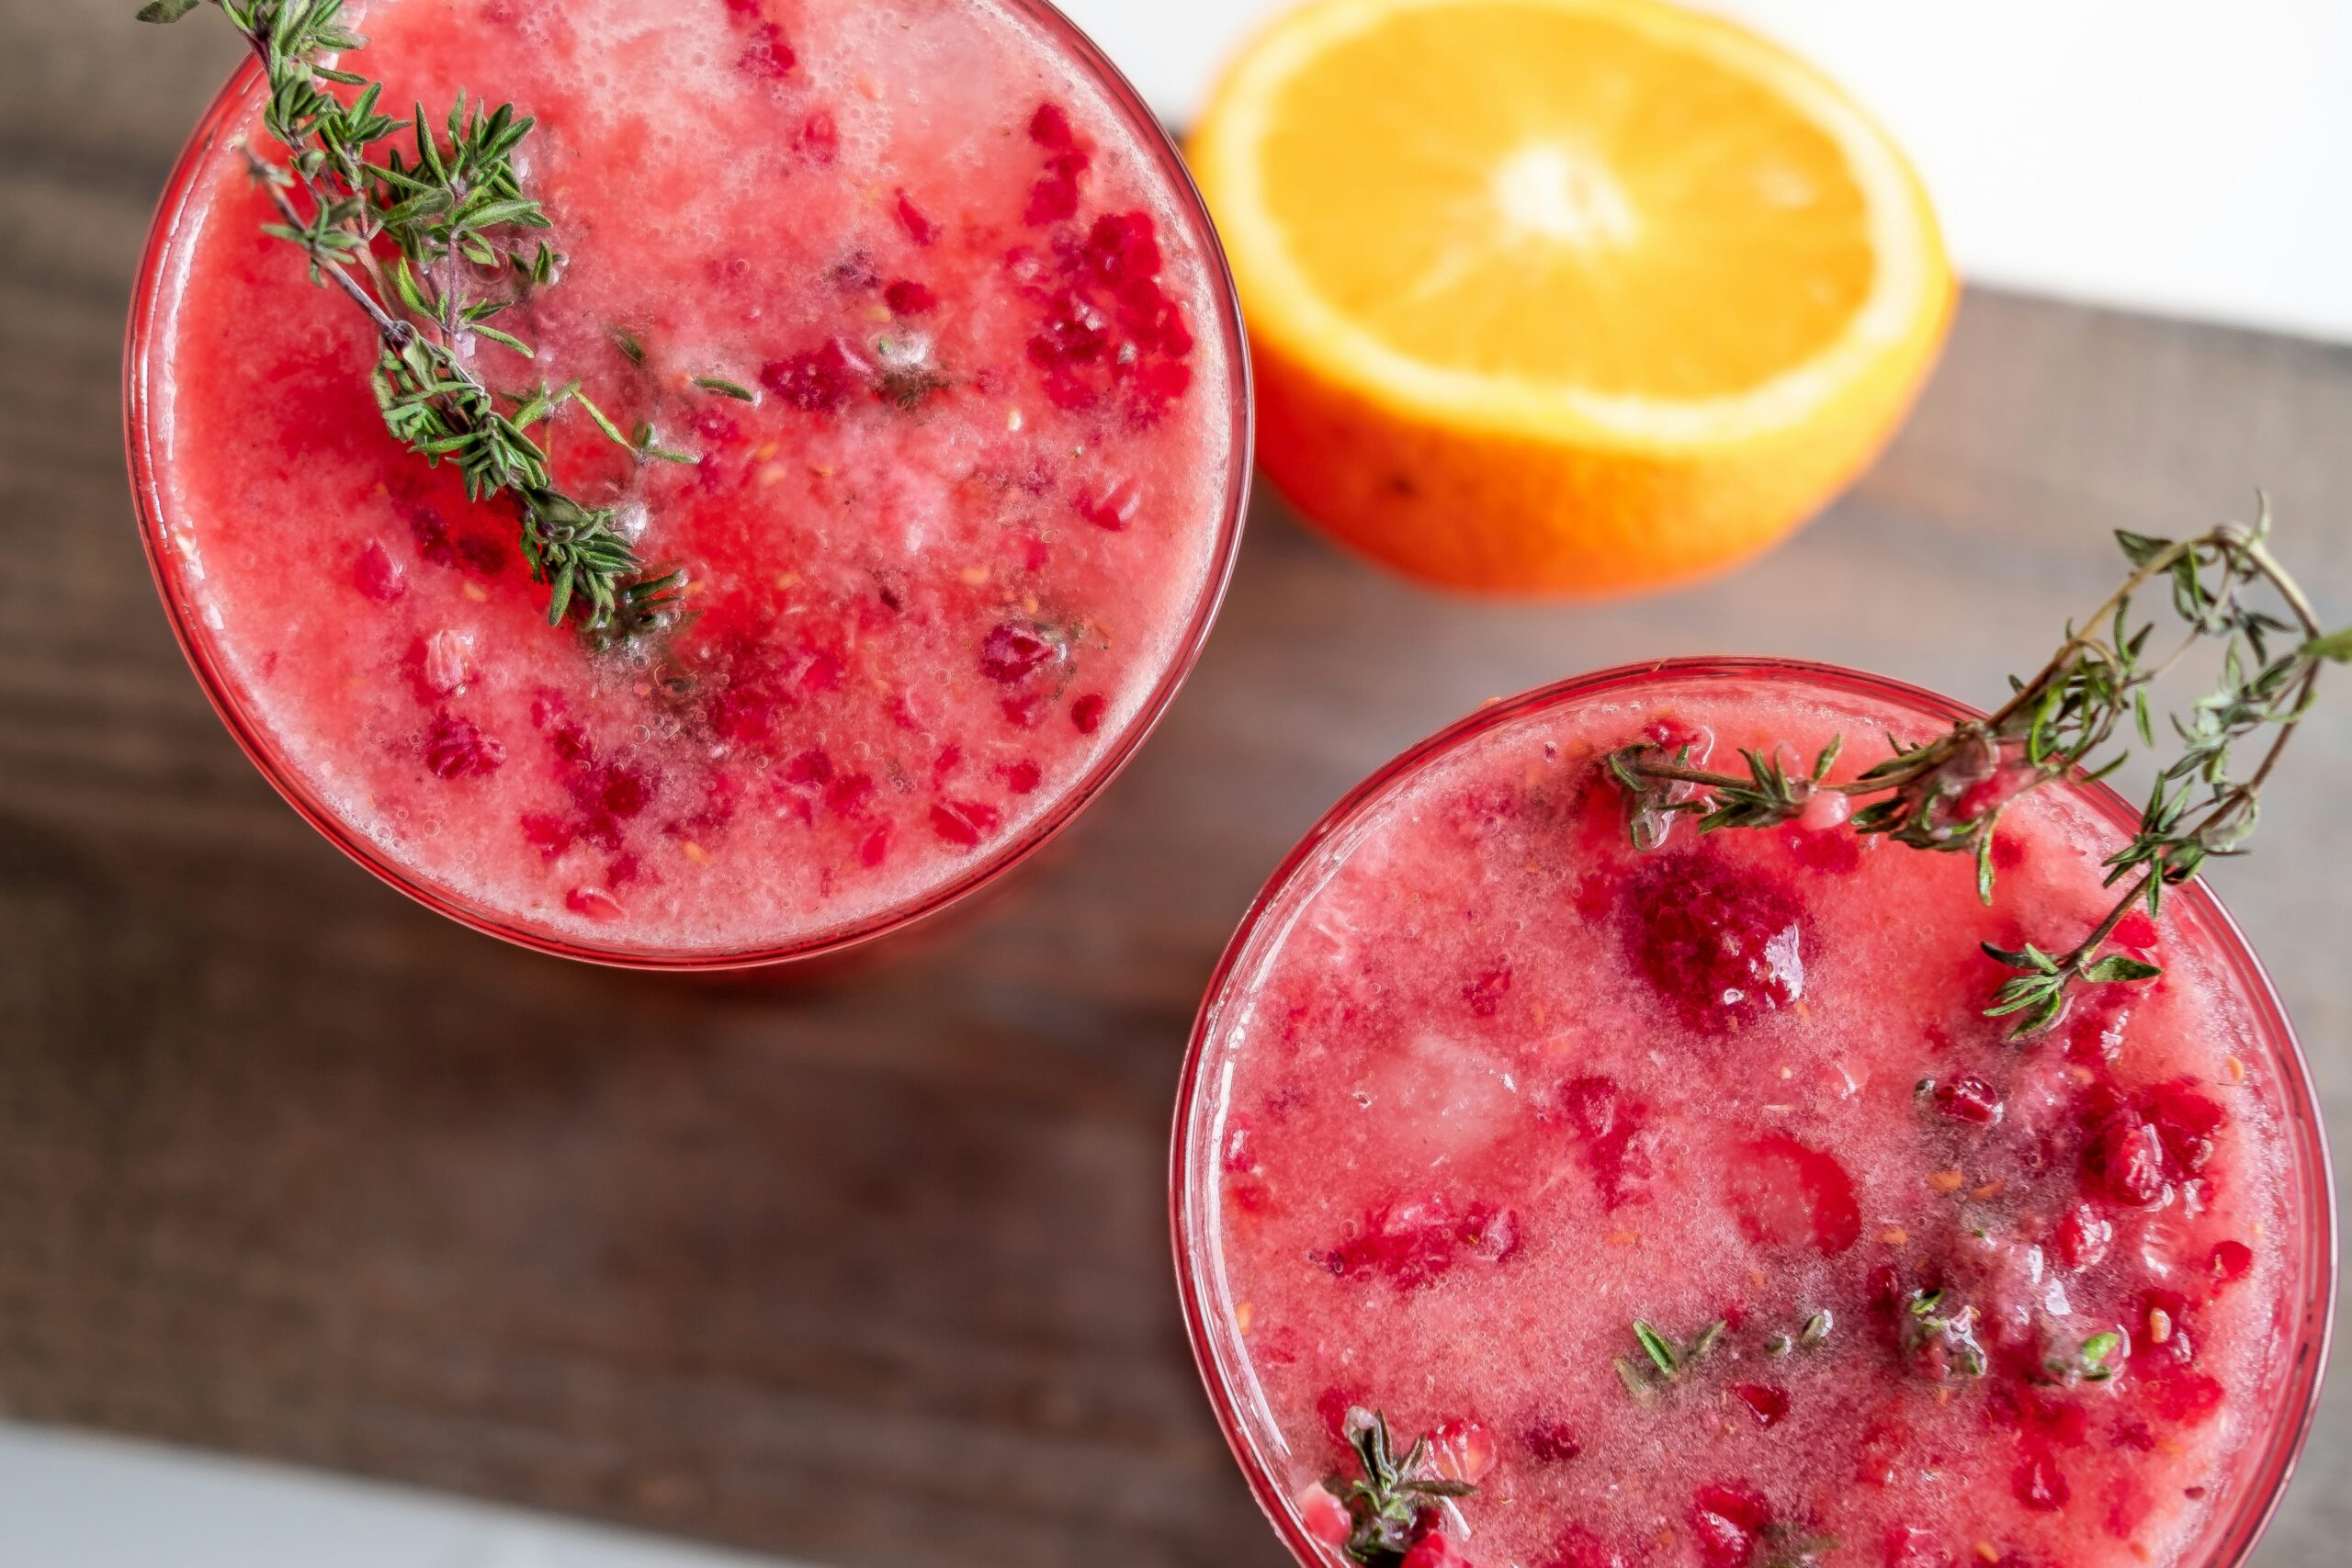 What's in the Sleepy Girl Mocktail? Check out this article to find out how you can make the drink that helps your sleep. Pictured: A fruit drink